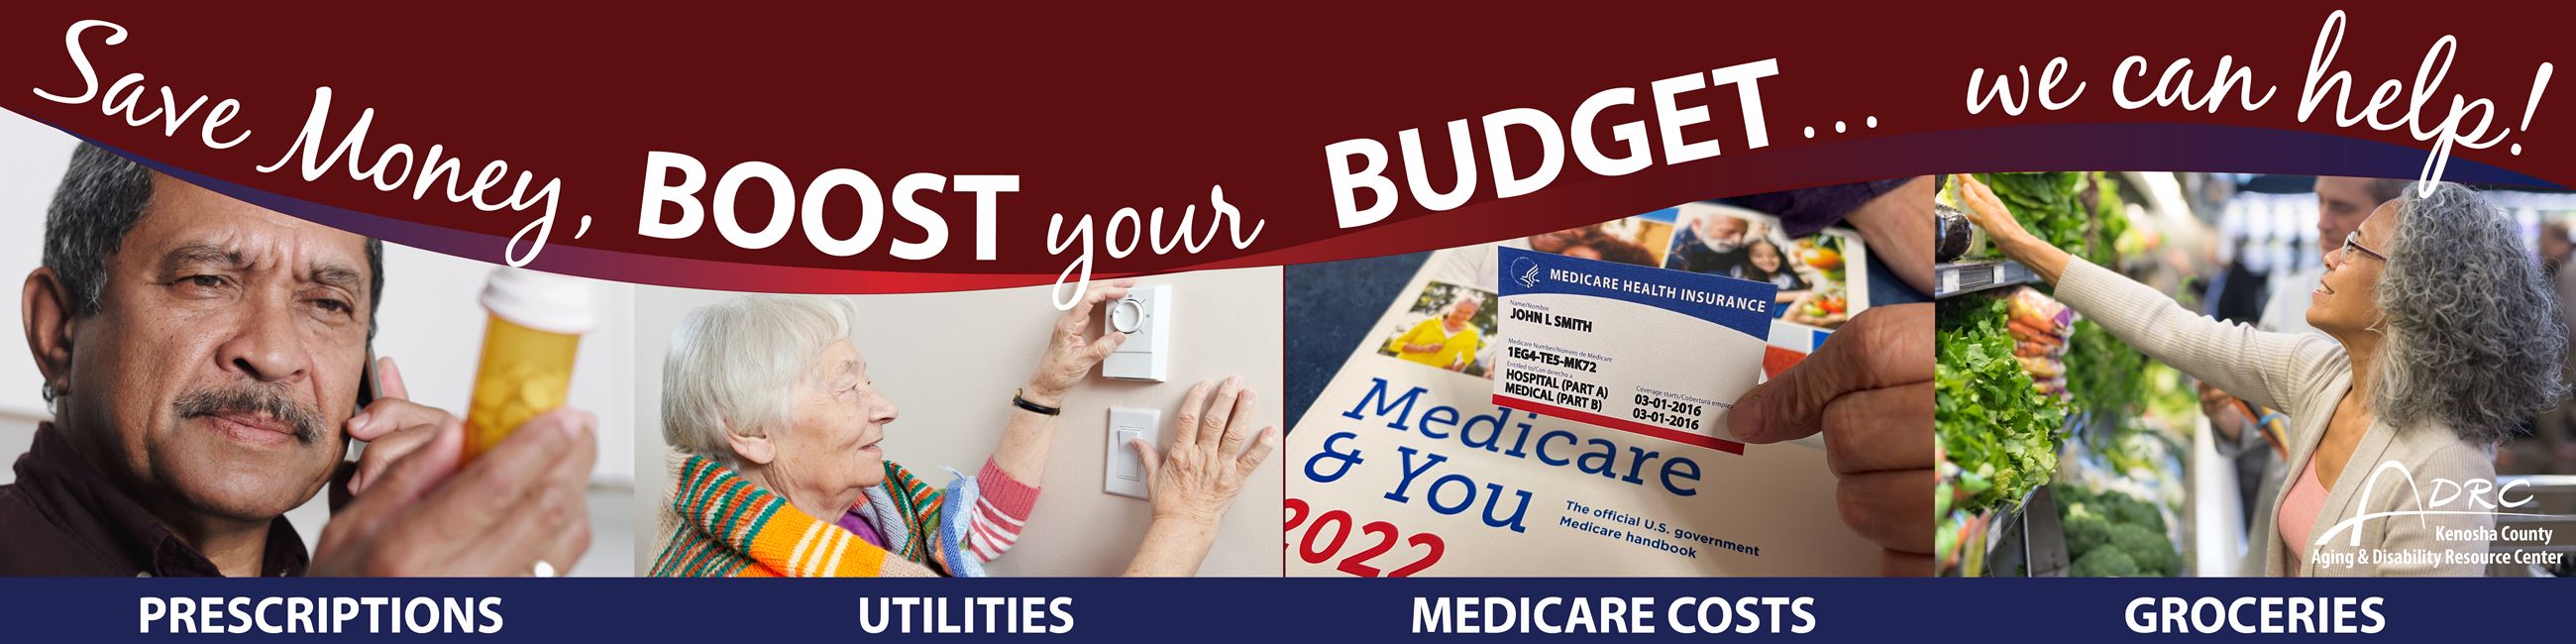 Boost Your Budget artwork.  Help with utilities, groceries, Medicare coverage, prescriptions